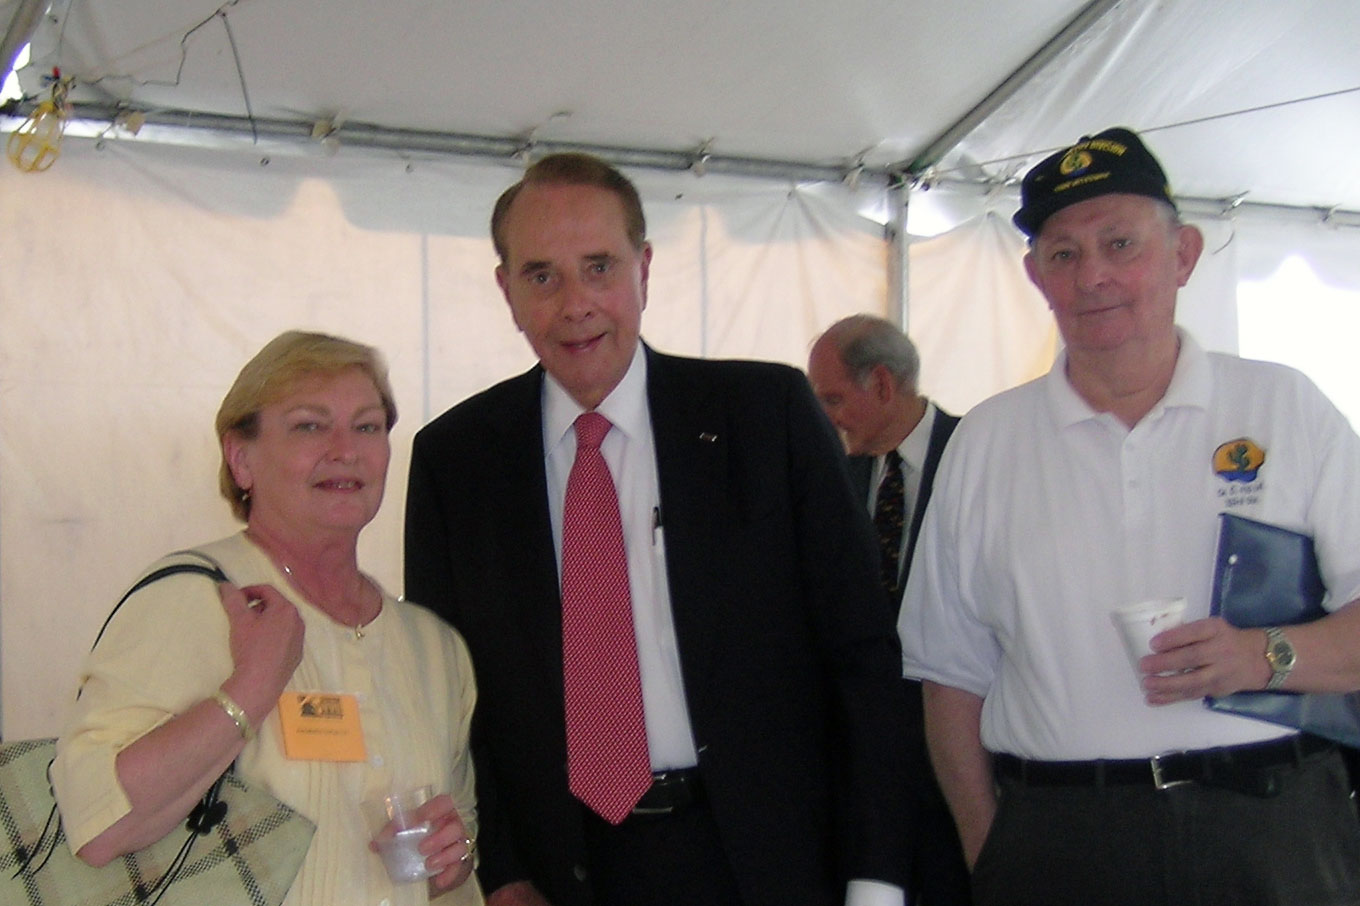 Three people pose under a large white tent. In the center is Bob Dole, dressed in dark suit and red tie, smiling.